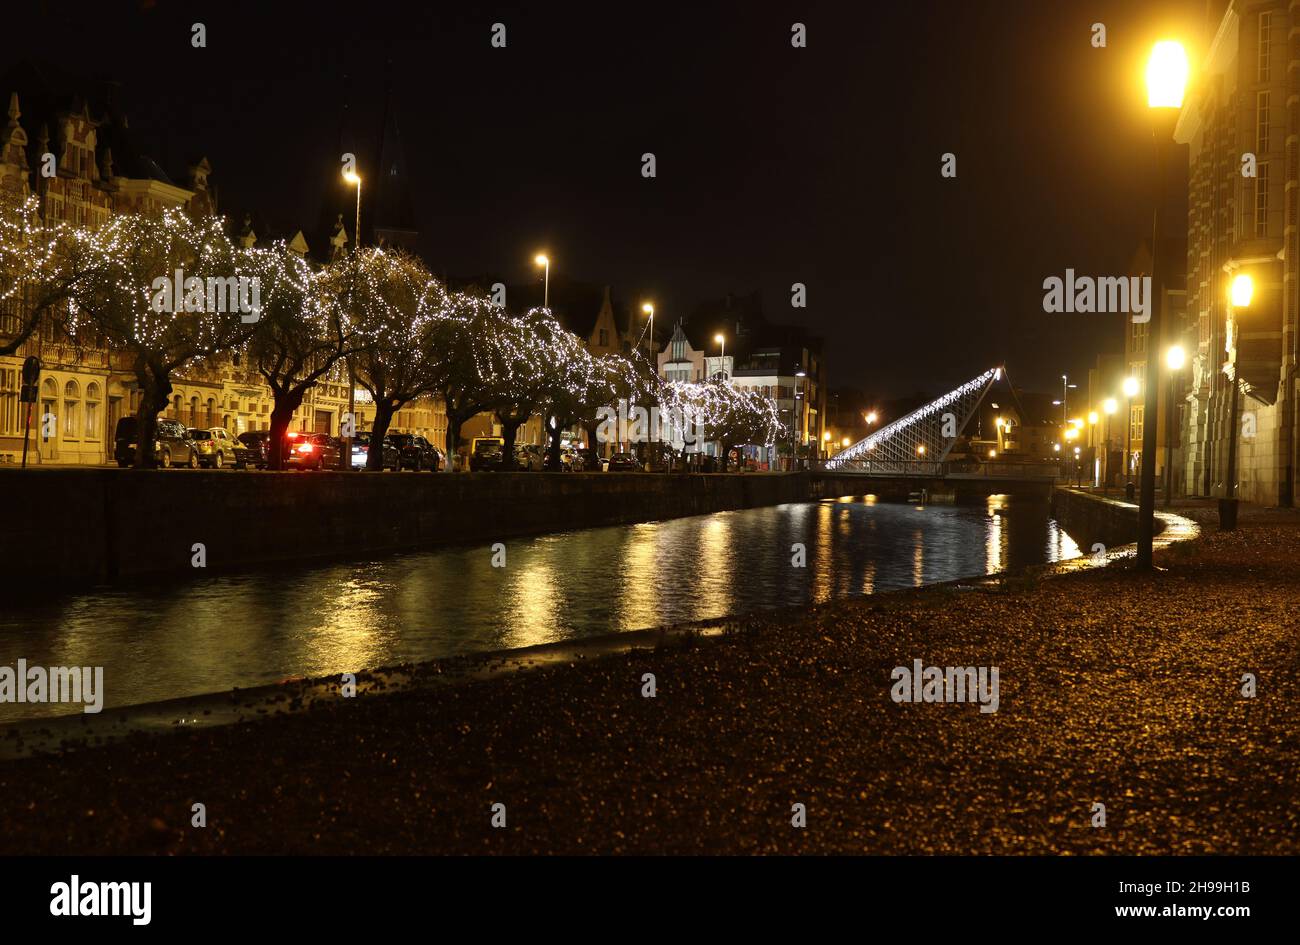 DENDERMONDE, BELGIUM, 4 DECEMBER 2021: Night time view of Dendermonde Waterfront and Oud Dender River, Belgium. Dendermonde is a large town in East Fl Stock Photo